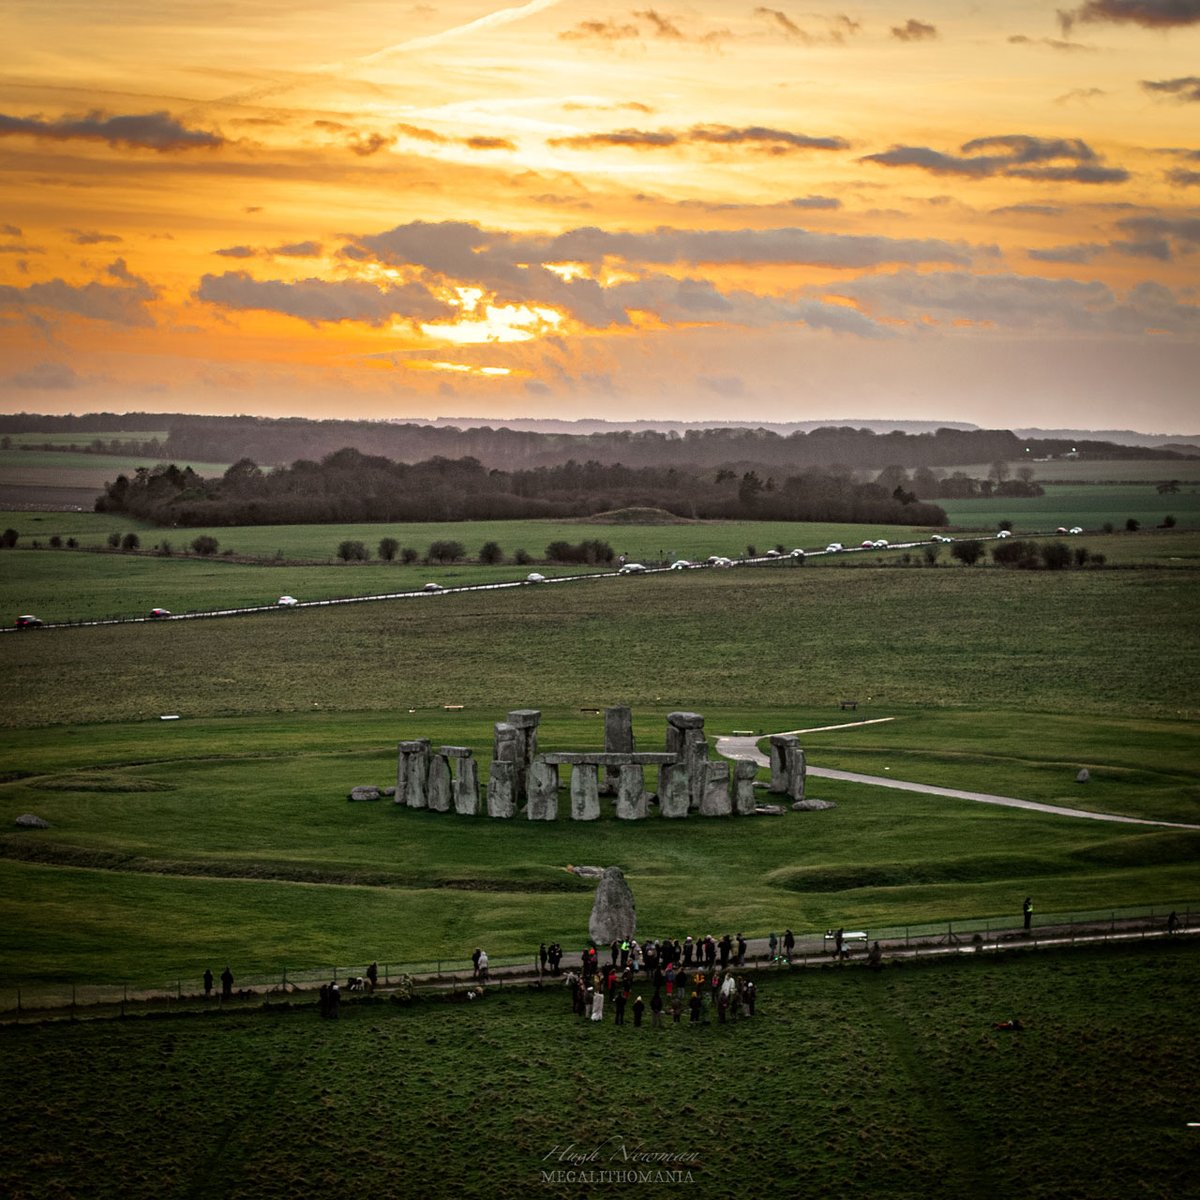 Winter solstice sunset at Stonehenge tonight. More info about winter solstice alignments at Stonehenge here: youtu.be/87zzgi5VCrY, plus check out our article looking at this, and other alignments: ancient-origins.net/news-history-a….

#wintersolstice #stonehenge #salisburyplain